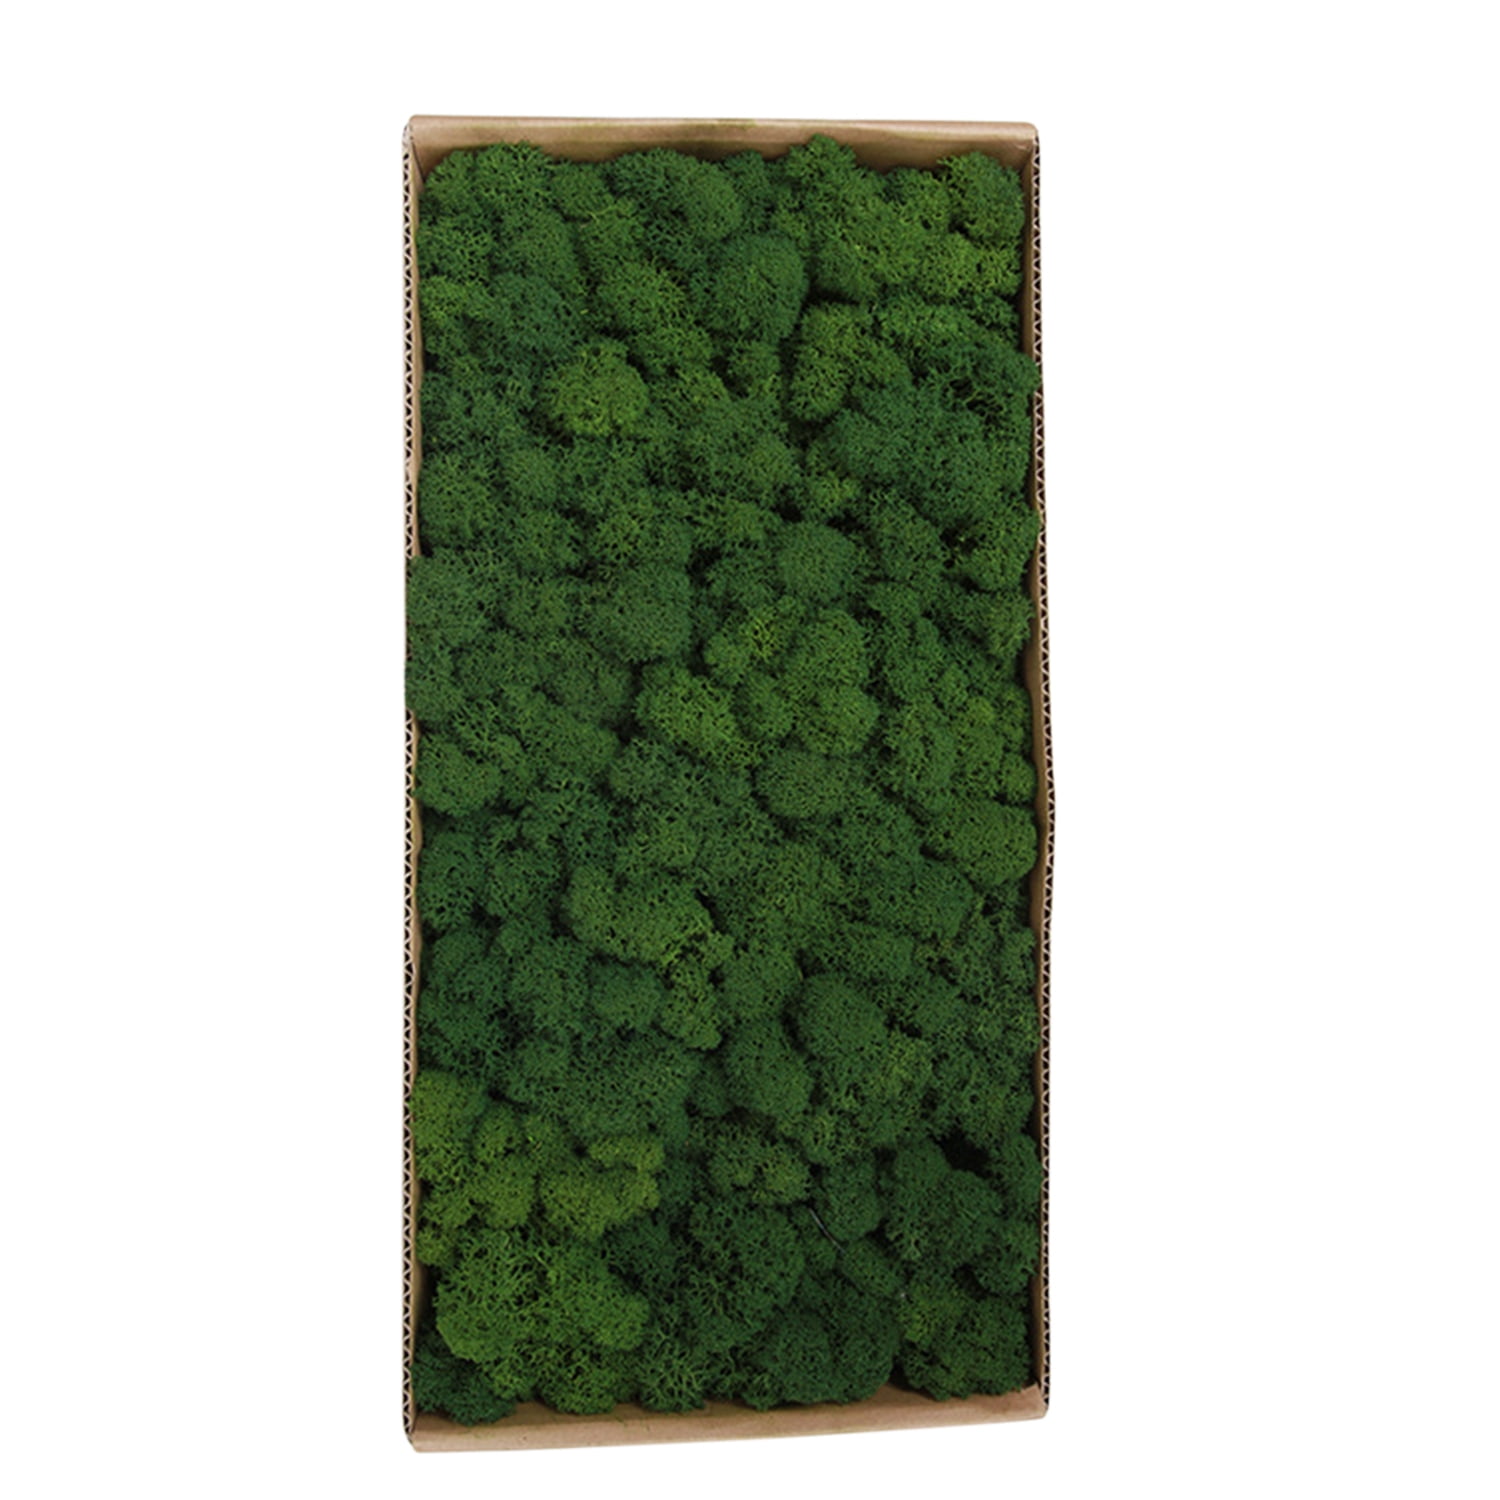 Preserved Moss Wall Decor Real Preserved Moss No Maintenance Required Naturally Preserved Moss for Home Wall Party Festivals Crafts Xmas Indoor Office Decoration Funien